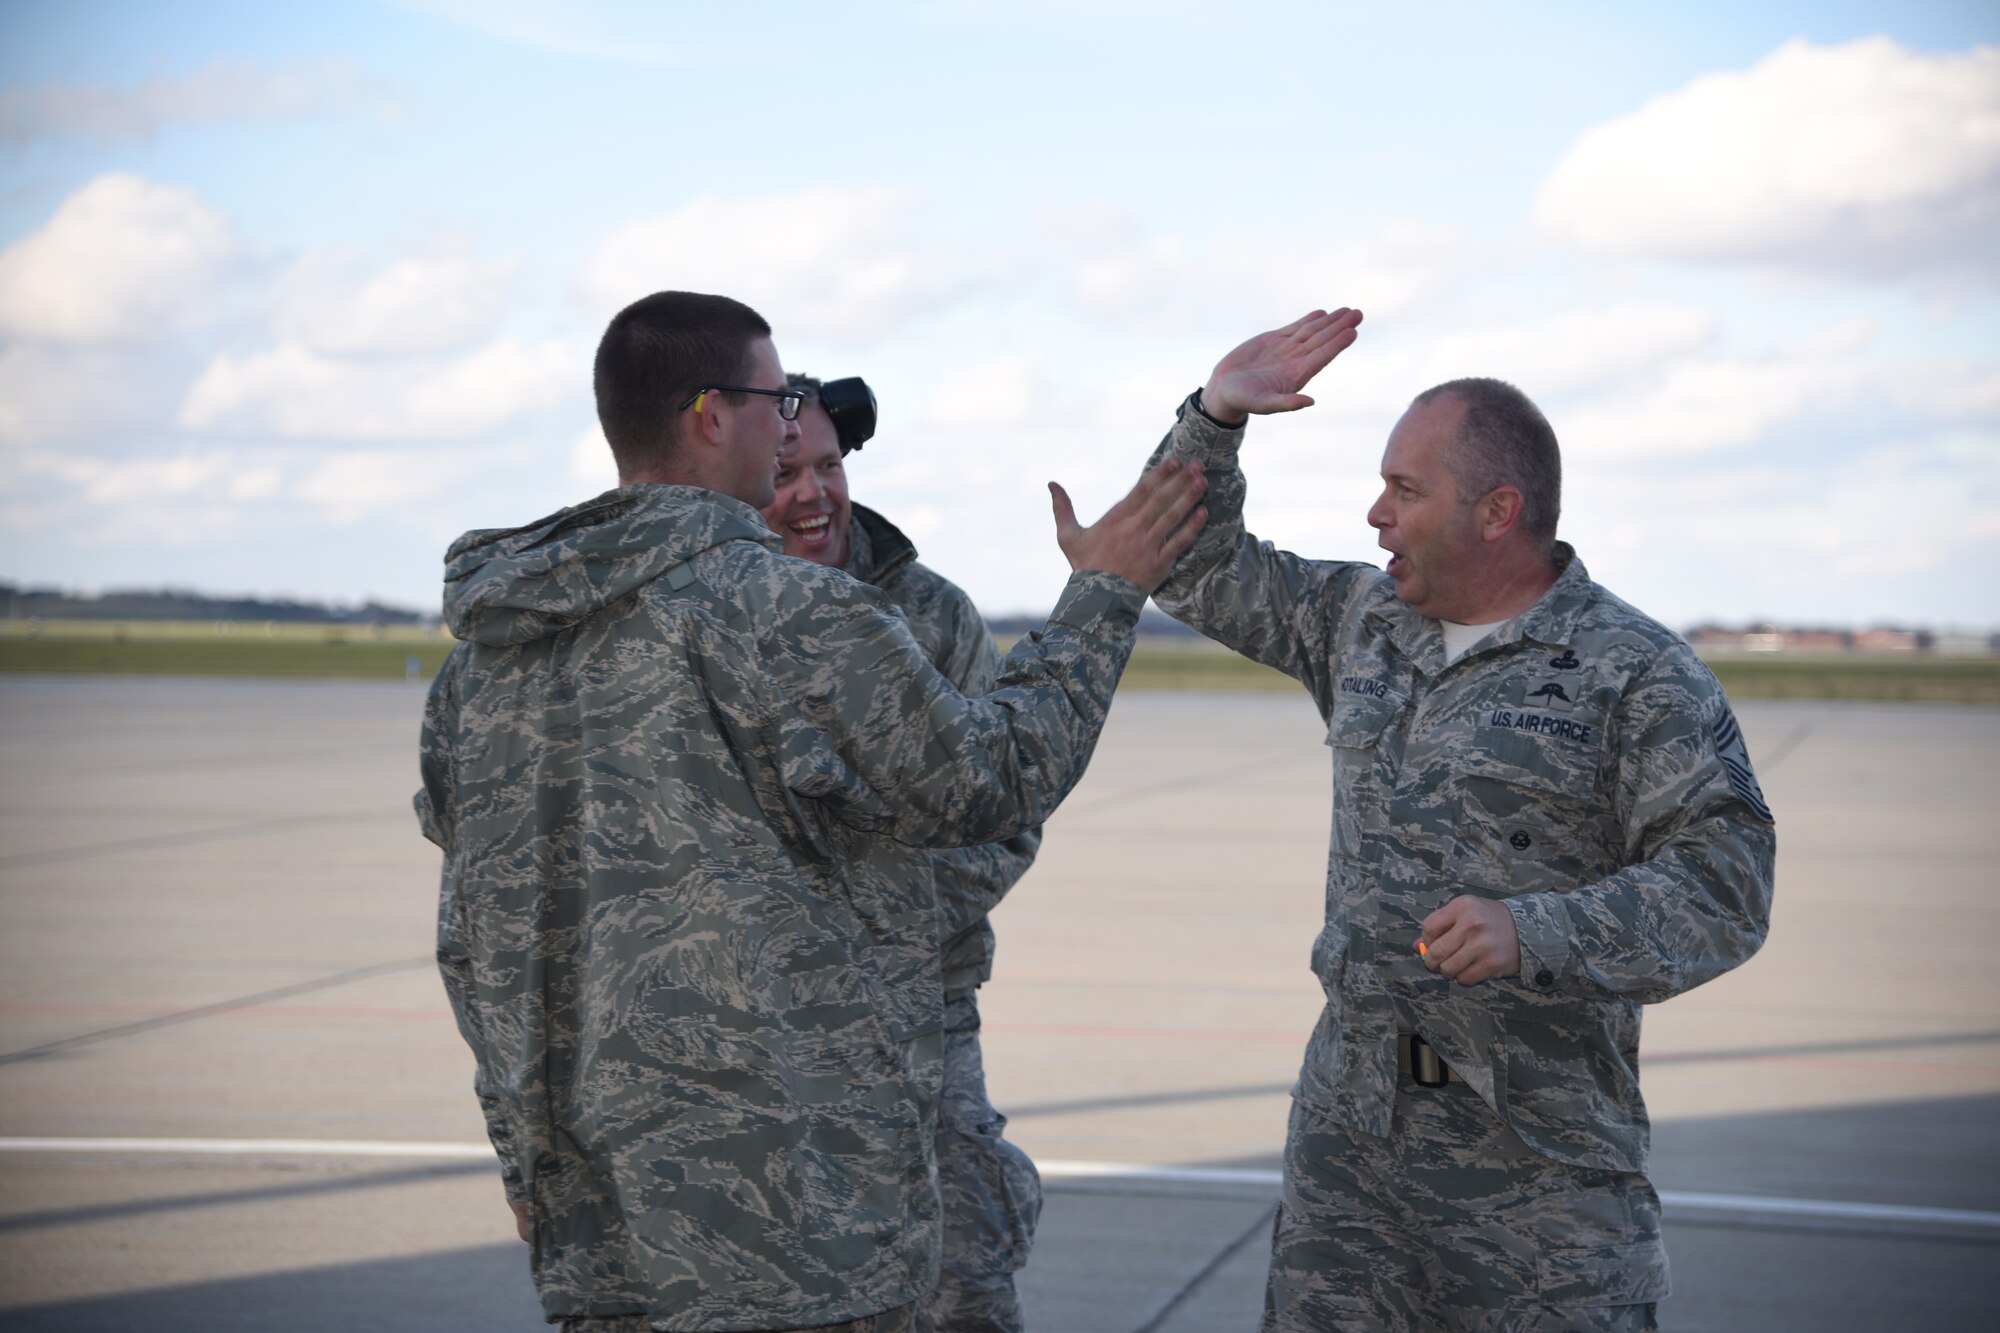 SIOUX FALLS, S.D. - Command Chief Master Sergeant of the Air National Guard James W. Hotaling gives Airman 1st Class Joseph Vandover, 114th Maintenance Group armament systems specialist, a high five after completion of the Chief's Challenge they participated in at Joe Foss Field, S.D. Nov. 6, 2015.  Hotaling was challenged to complete a timed course driving the MJ-1 Jammer and the Chief completed the course with an impressive time. (U.S. Air National Guard photo by Senior Master Sgt. Nancy Ausland/Released)